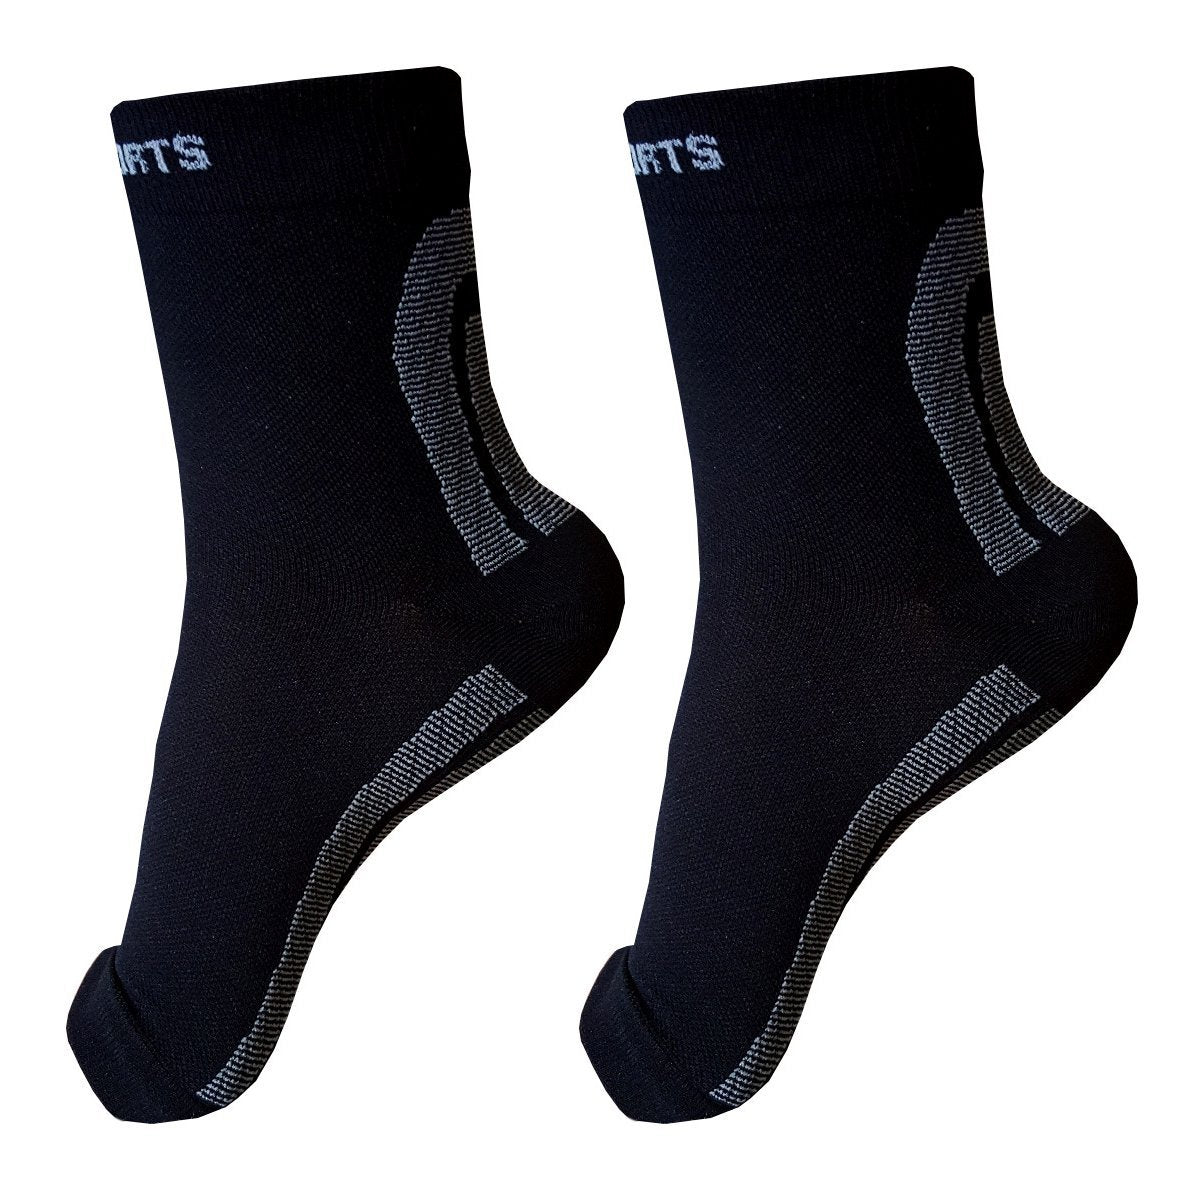 Foot Compression Sleeve